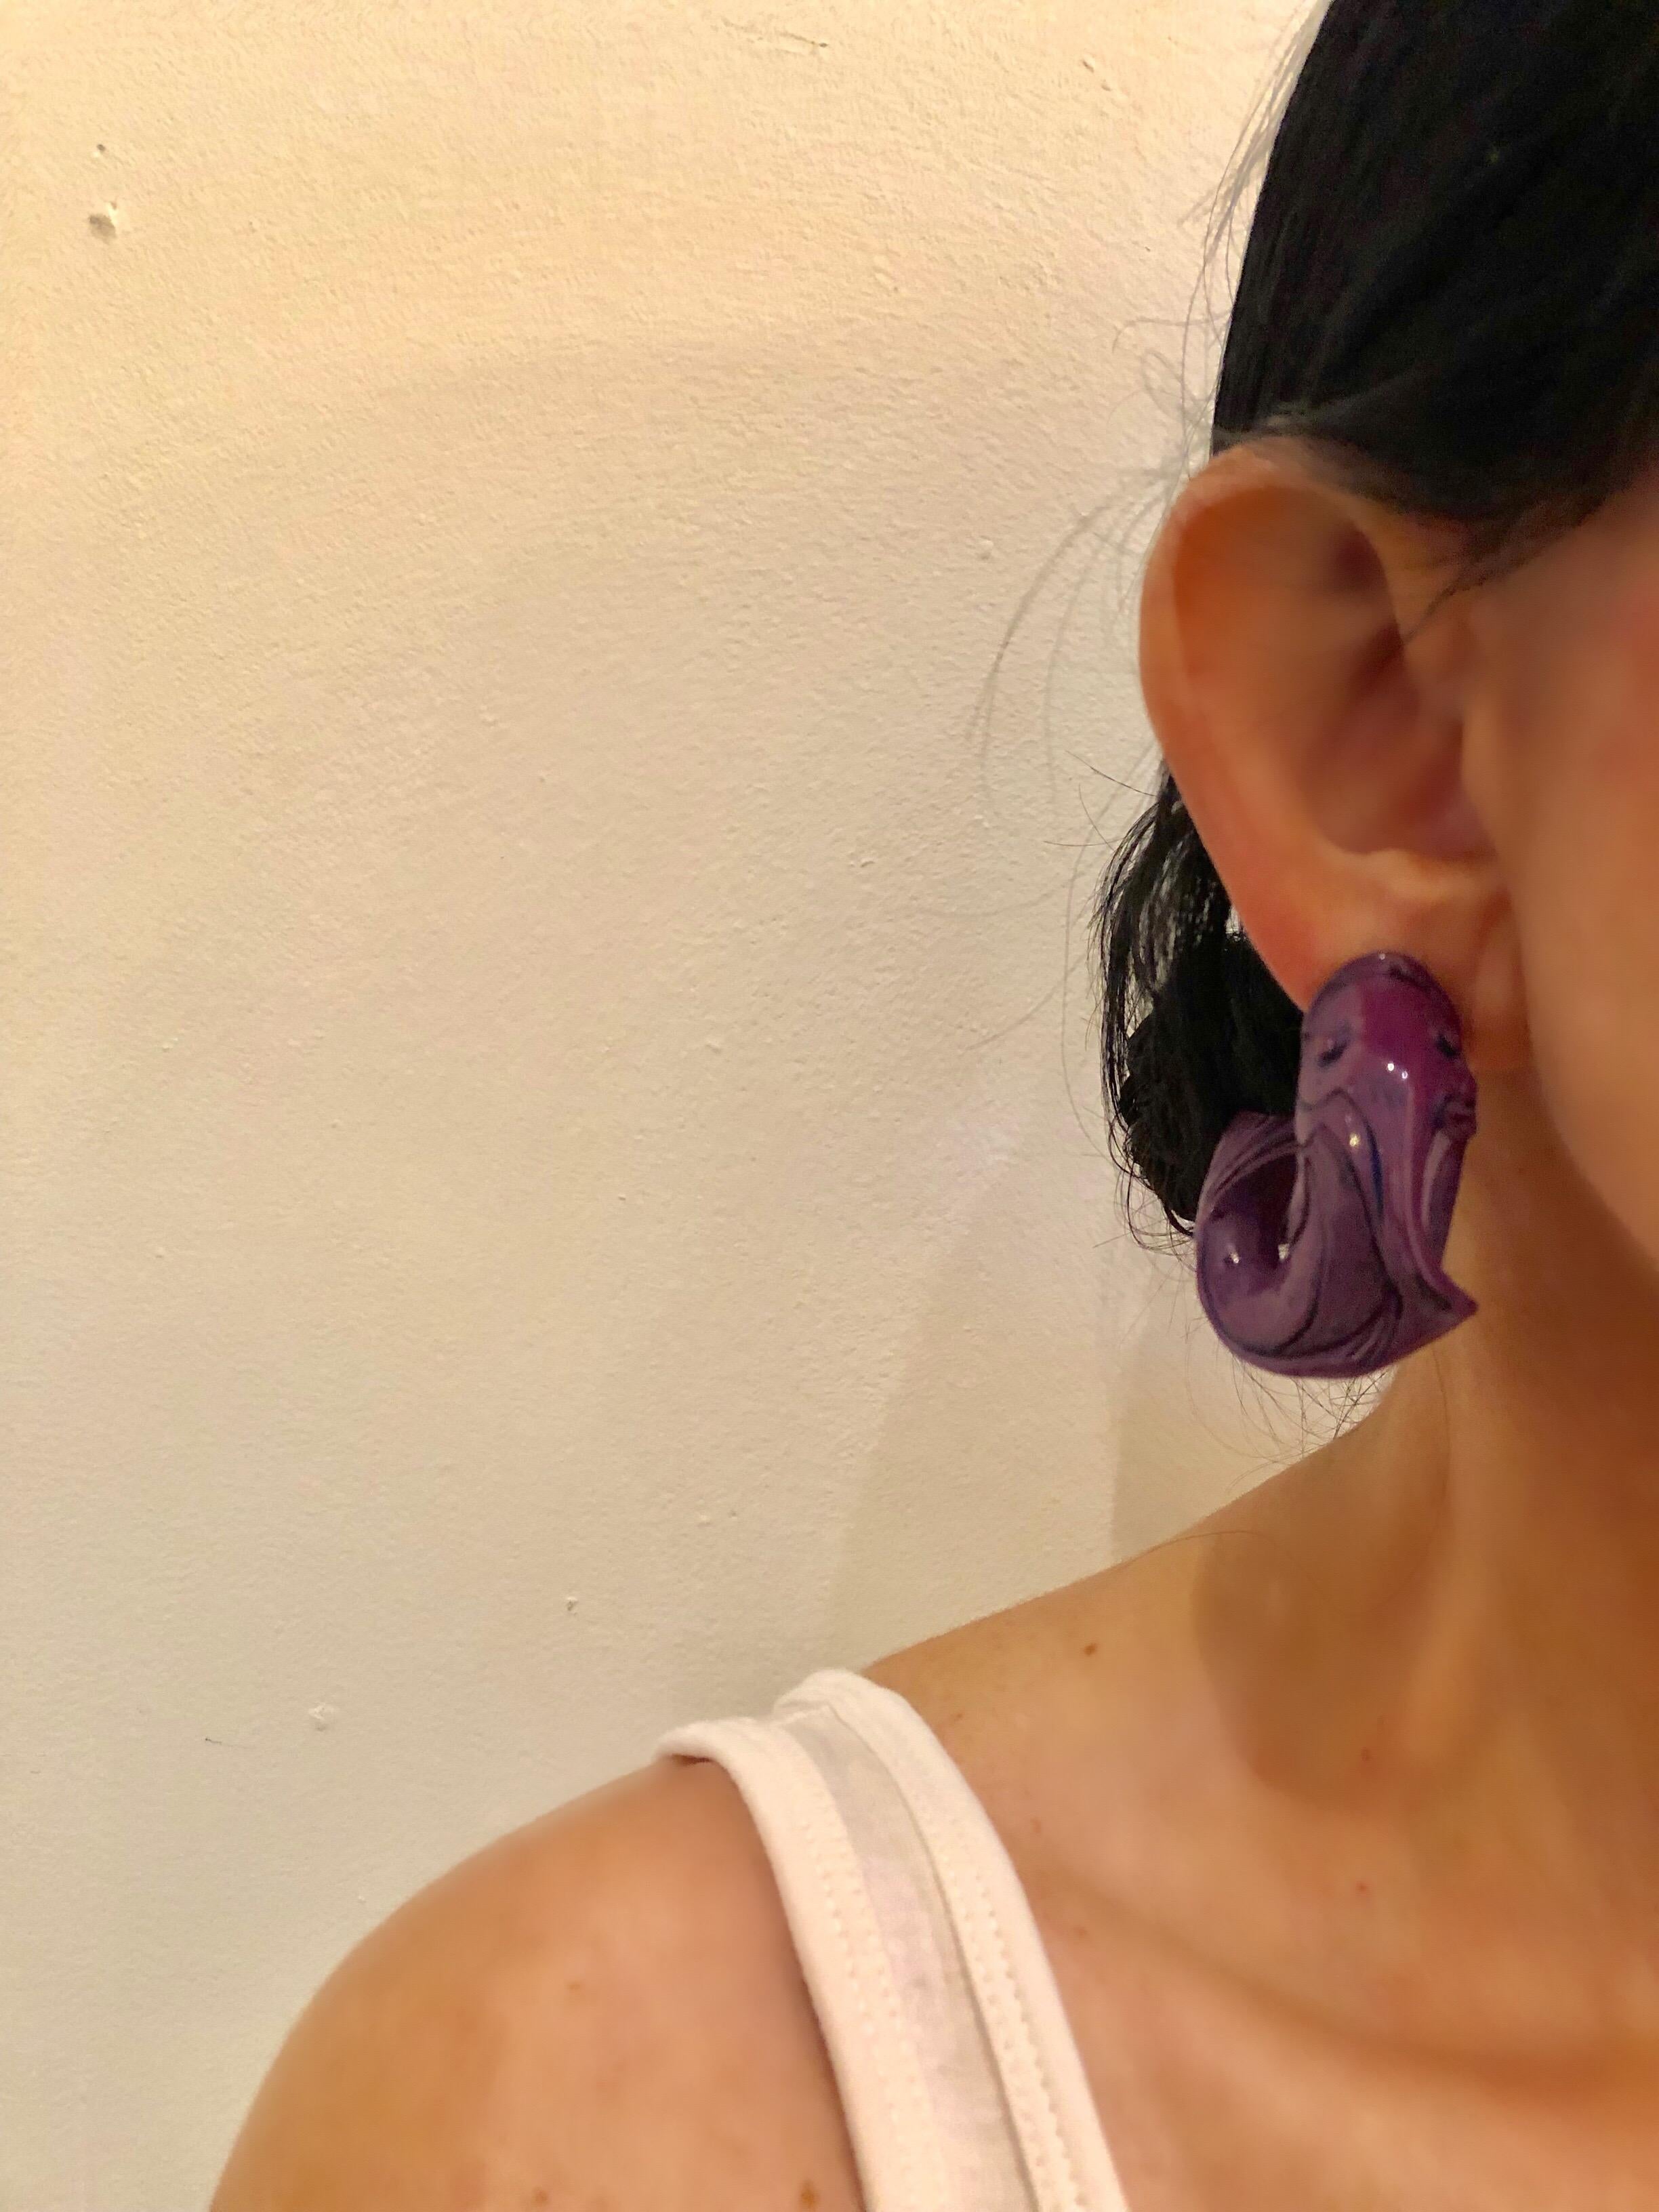 Vintage high-fashion purple statement earrings made in Paris c.1980's - the architectural statement earrings are comprised of highly carved purple resin and depict a fish. The overall design is very unique, edgy and fashion current - the clip-on